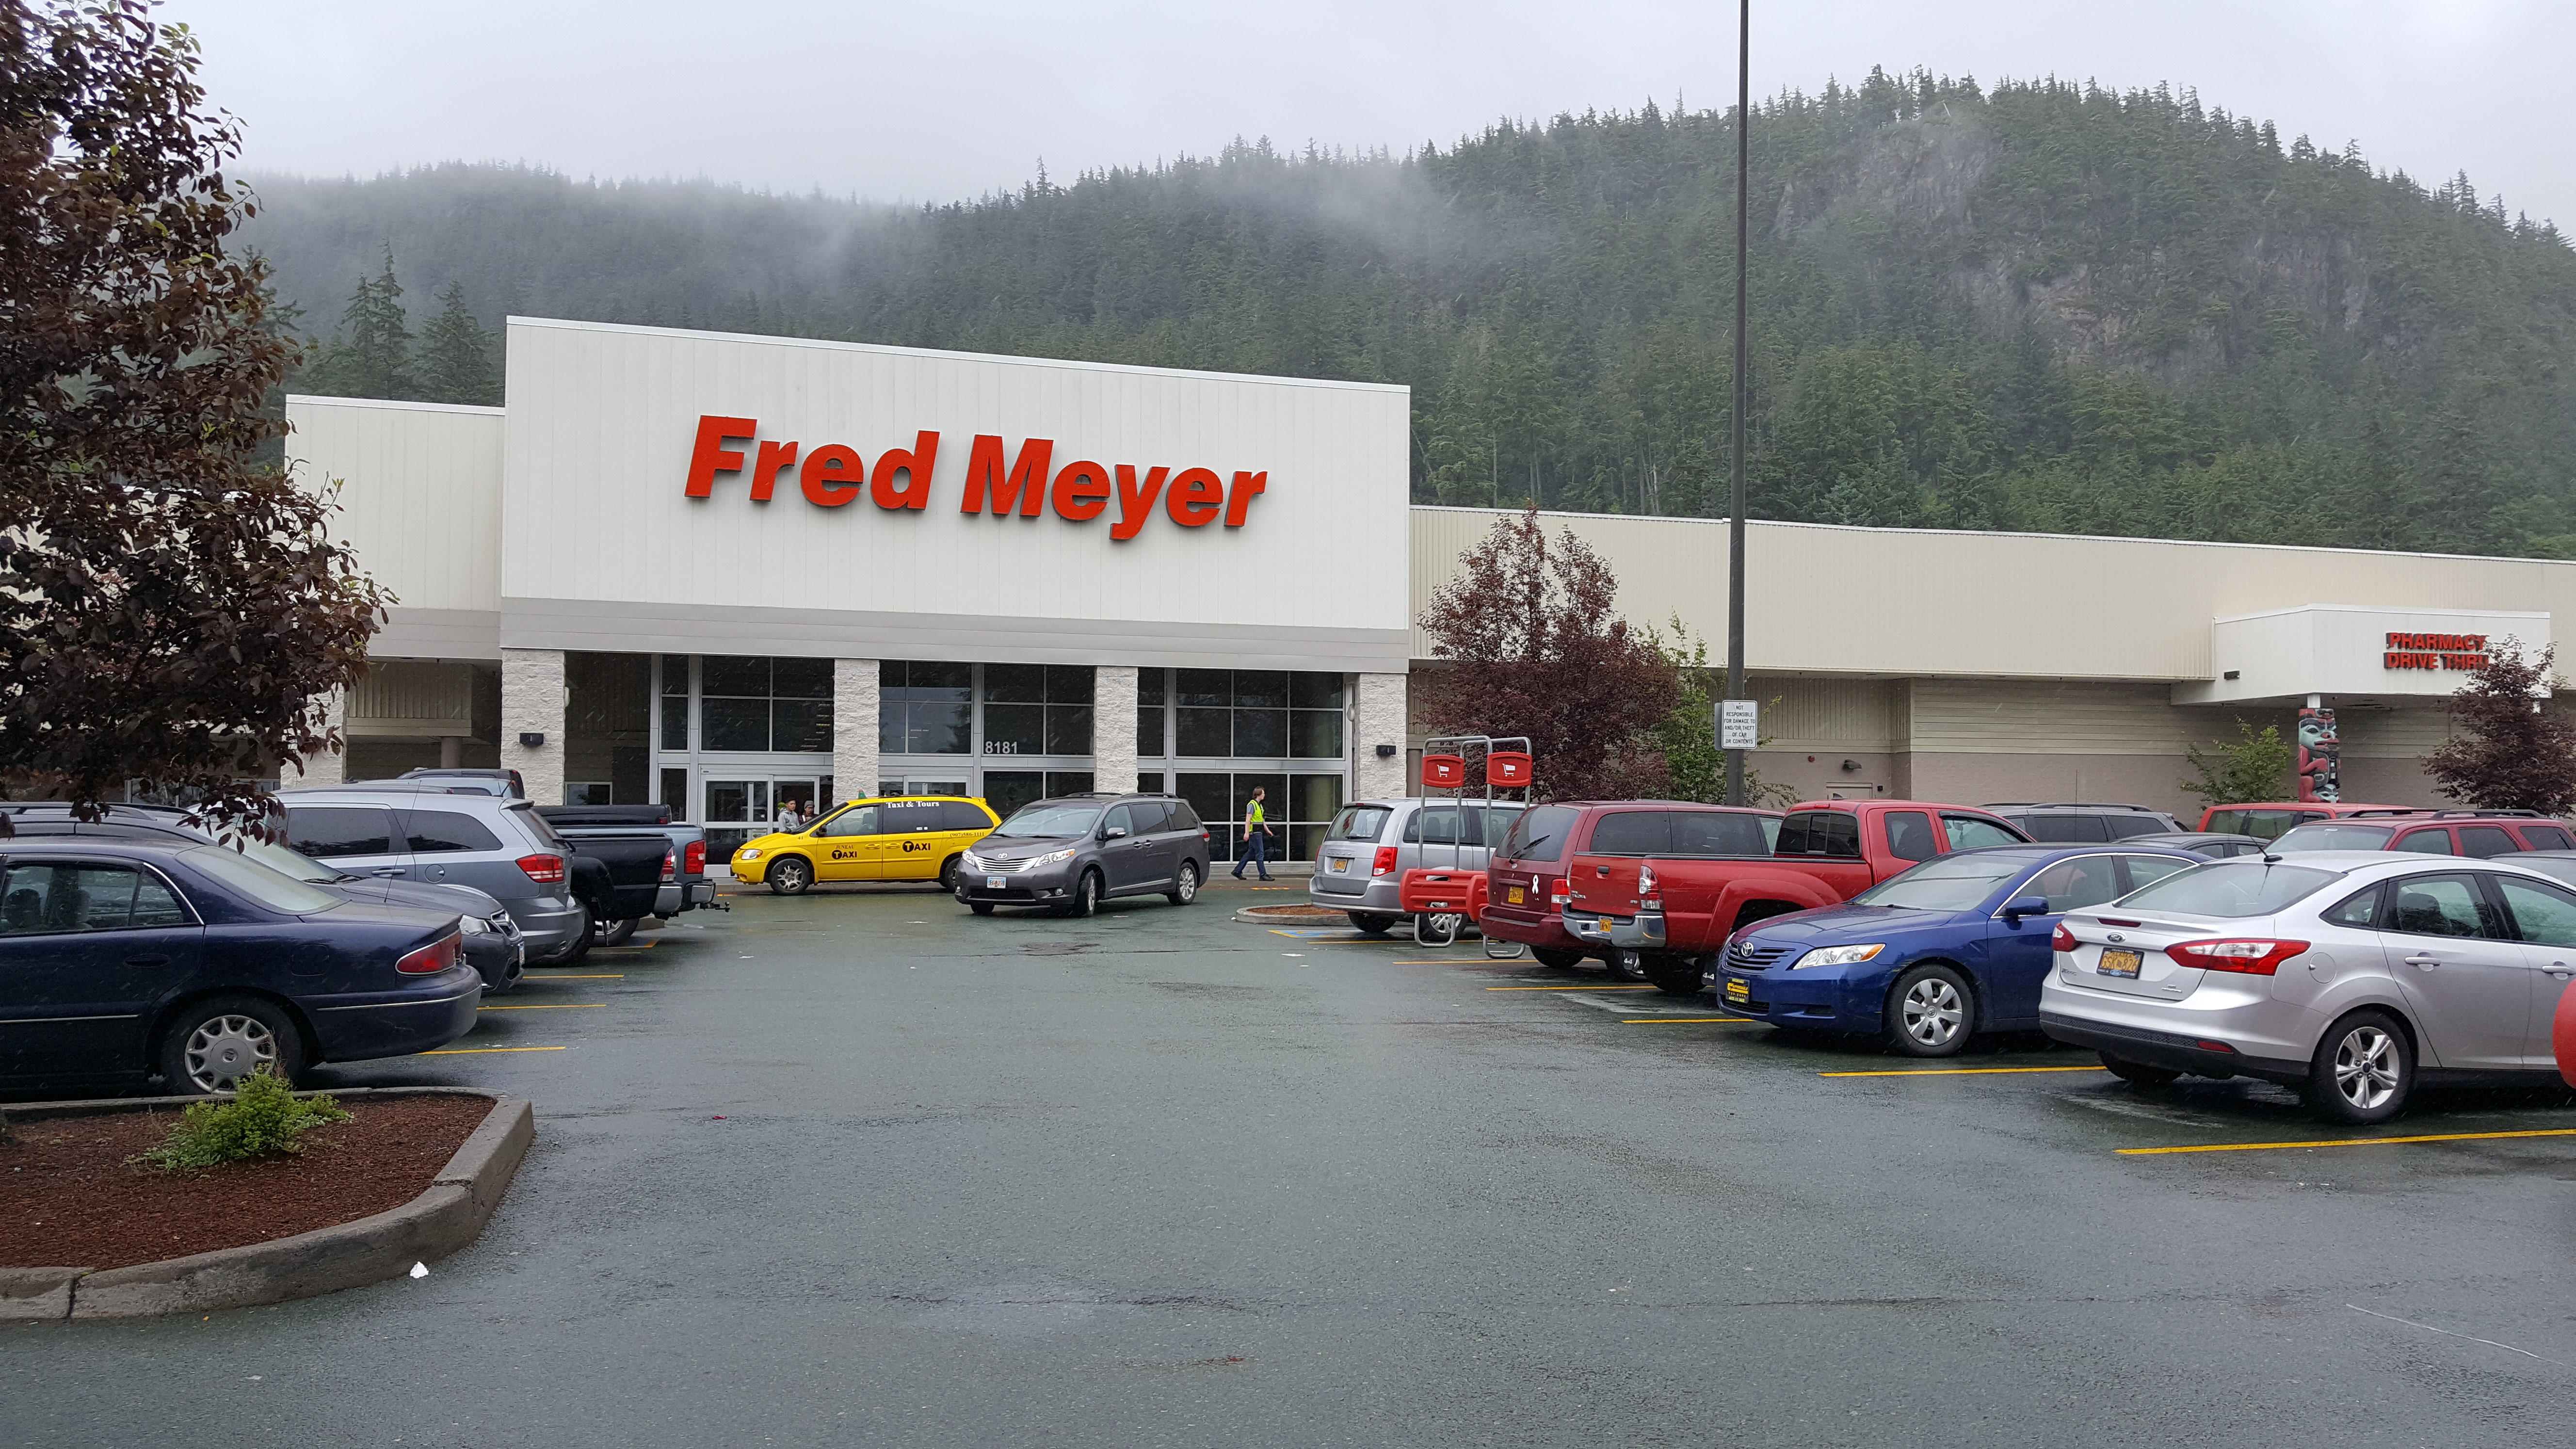 FRED MEYER - 30 Photos & 37 Reviews - 3755 Airport Way, Fairbanks